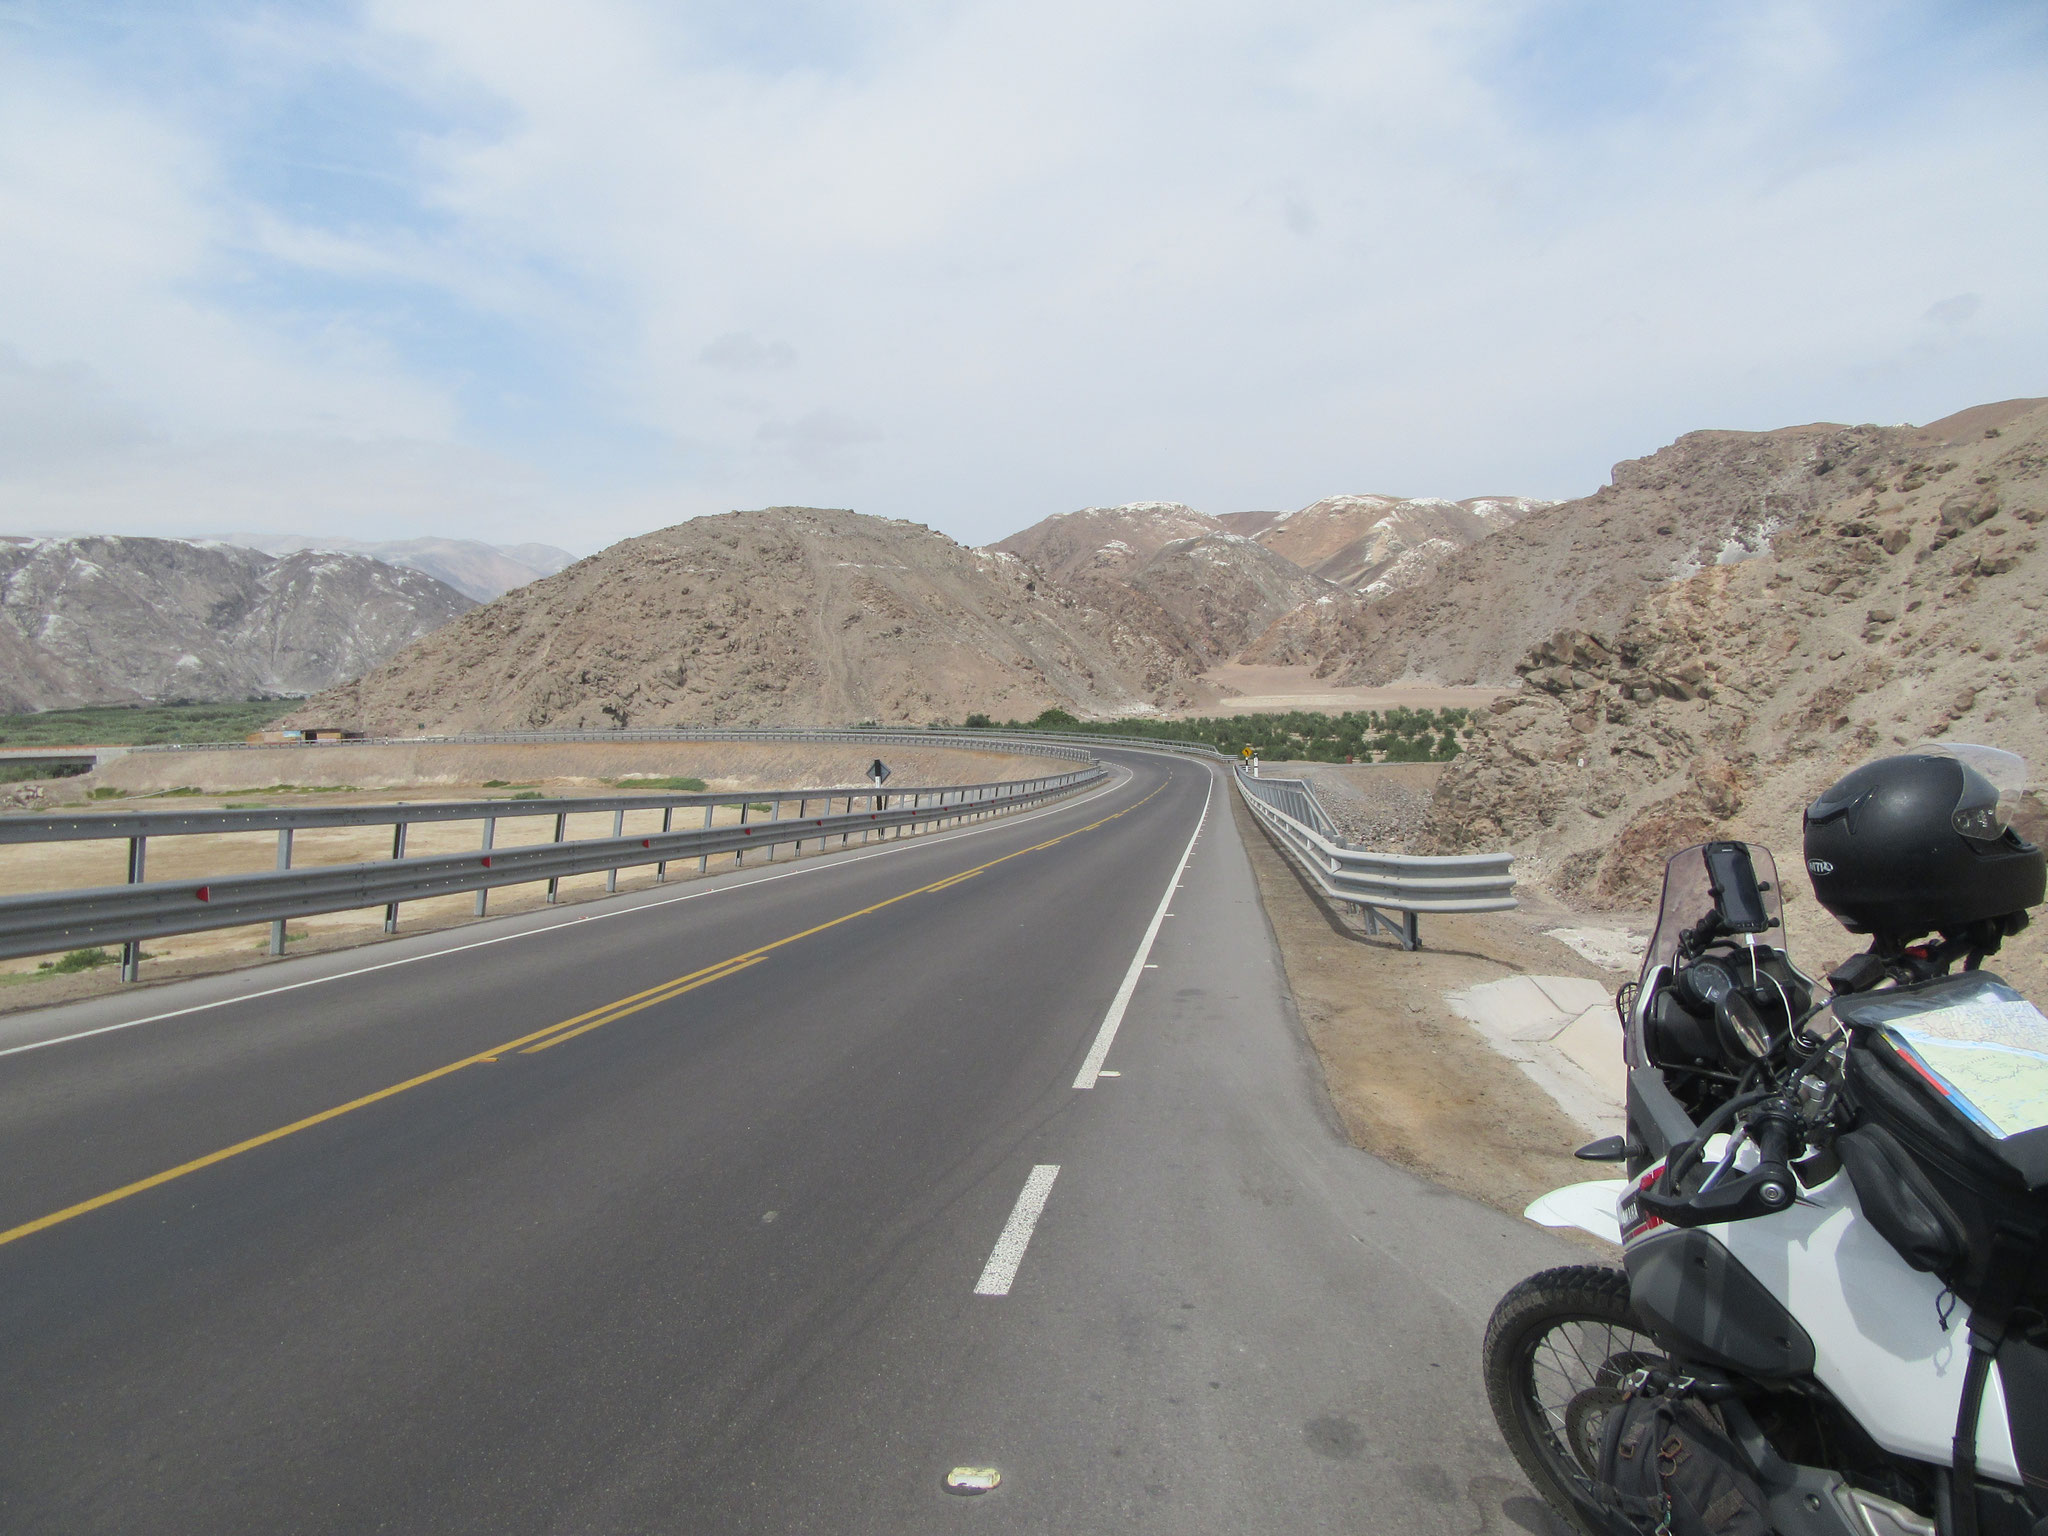 Driving through the South of Peru